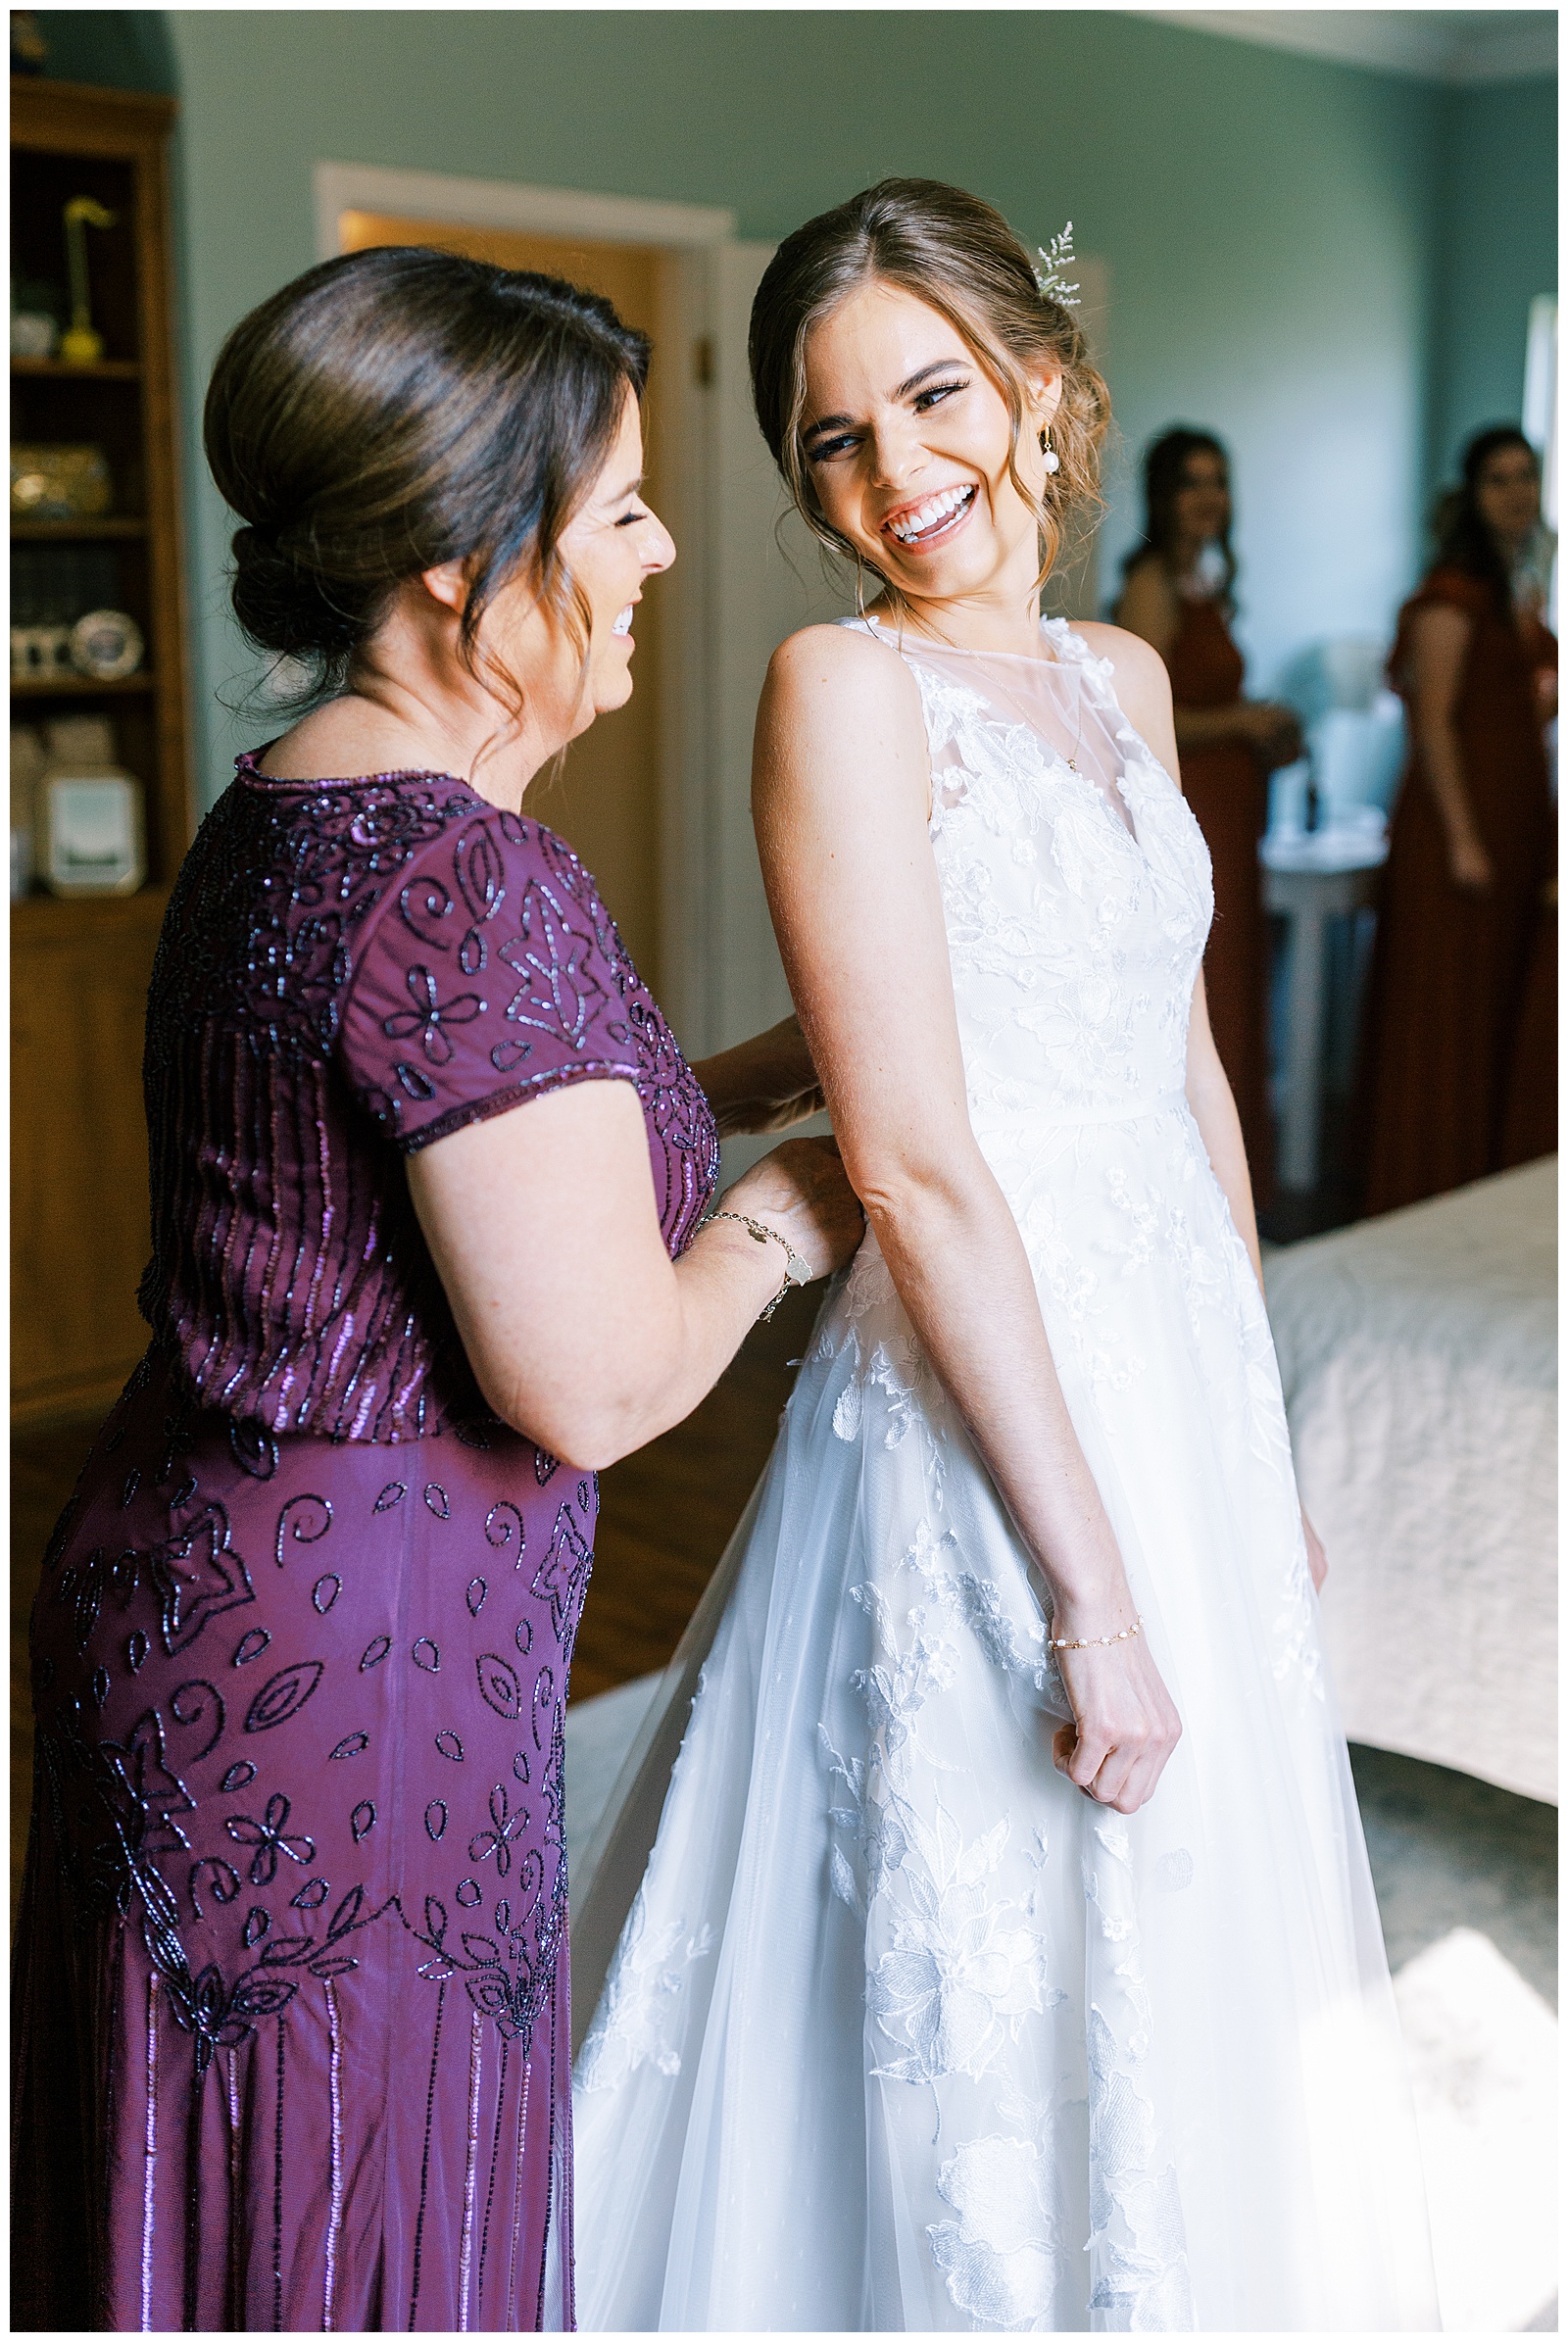 bride smiling at mom as mom buttons wedding gown bride getting ready